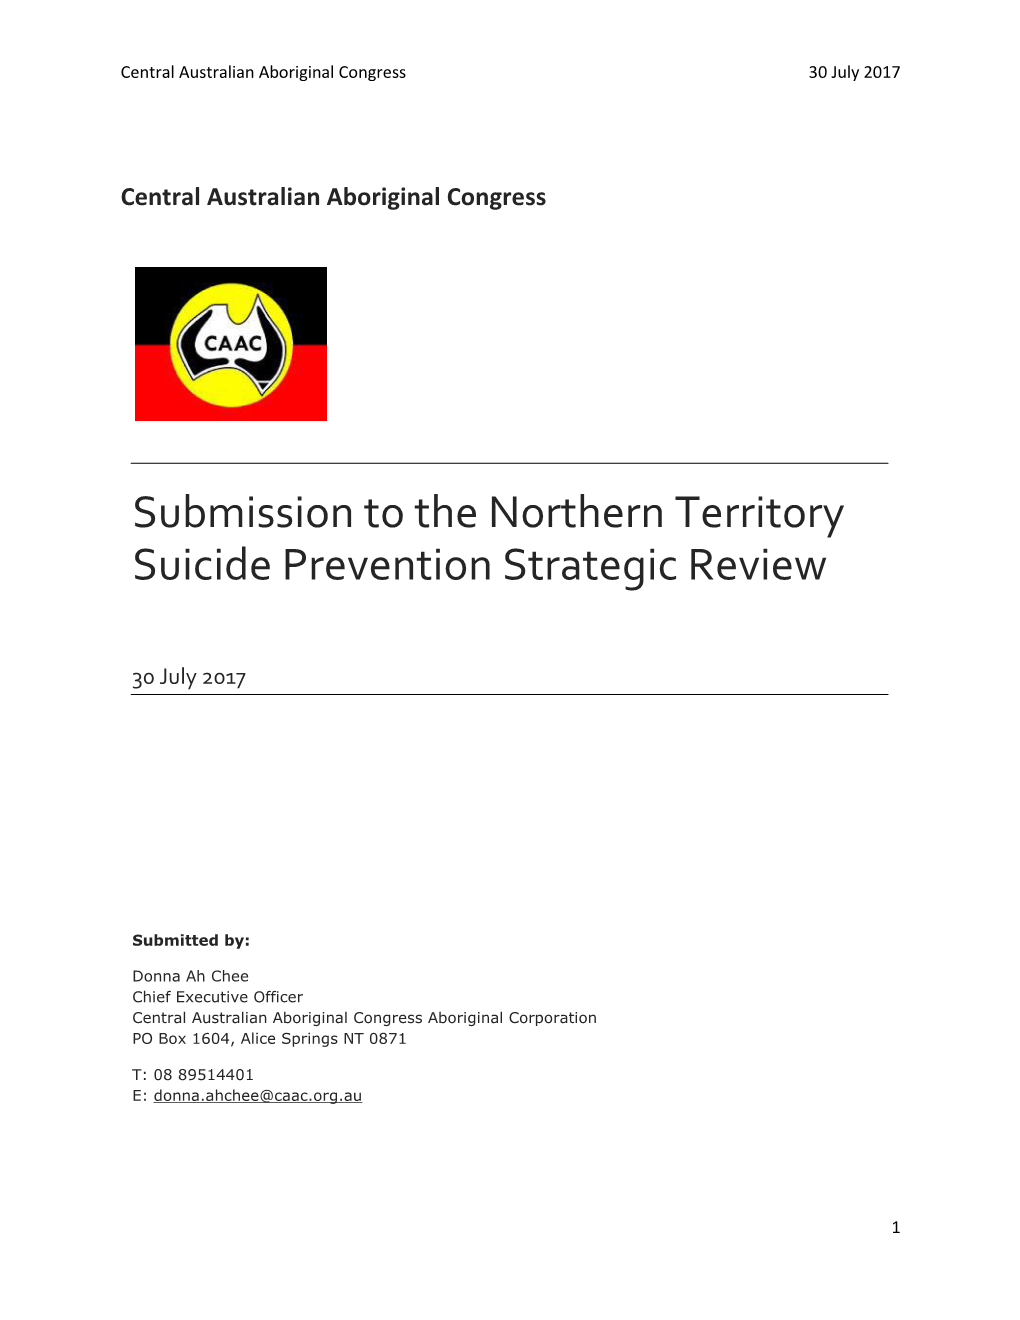 Submission to the Northern Territory Suicide Prevention Strategic Review